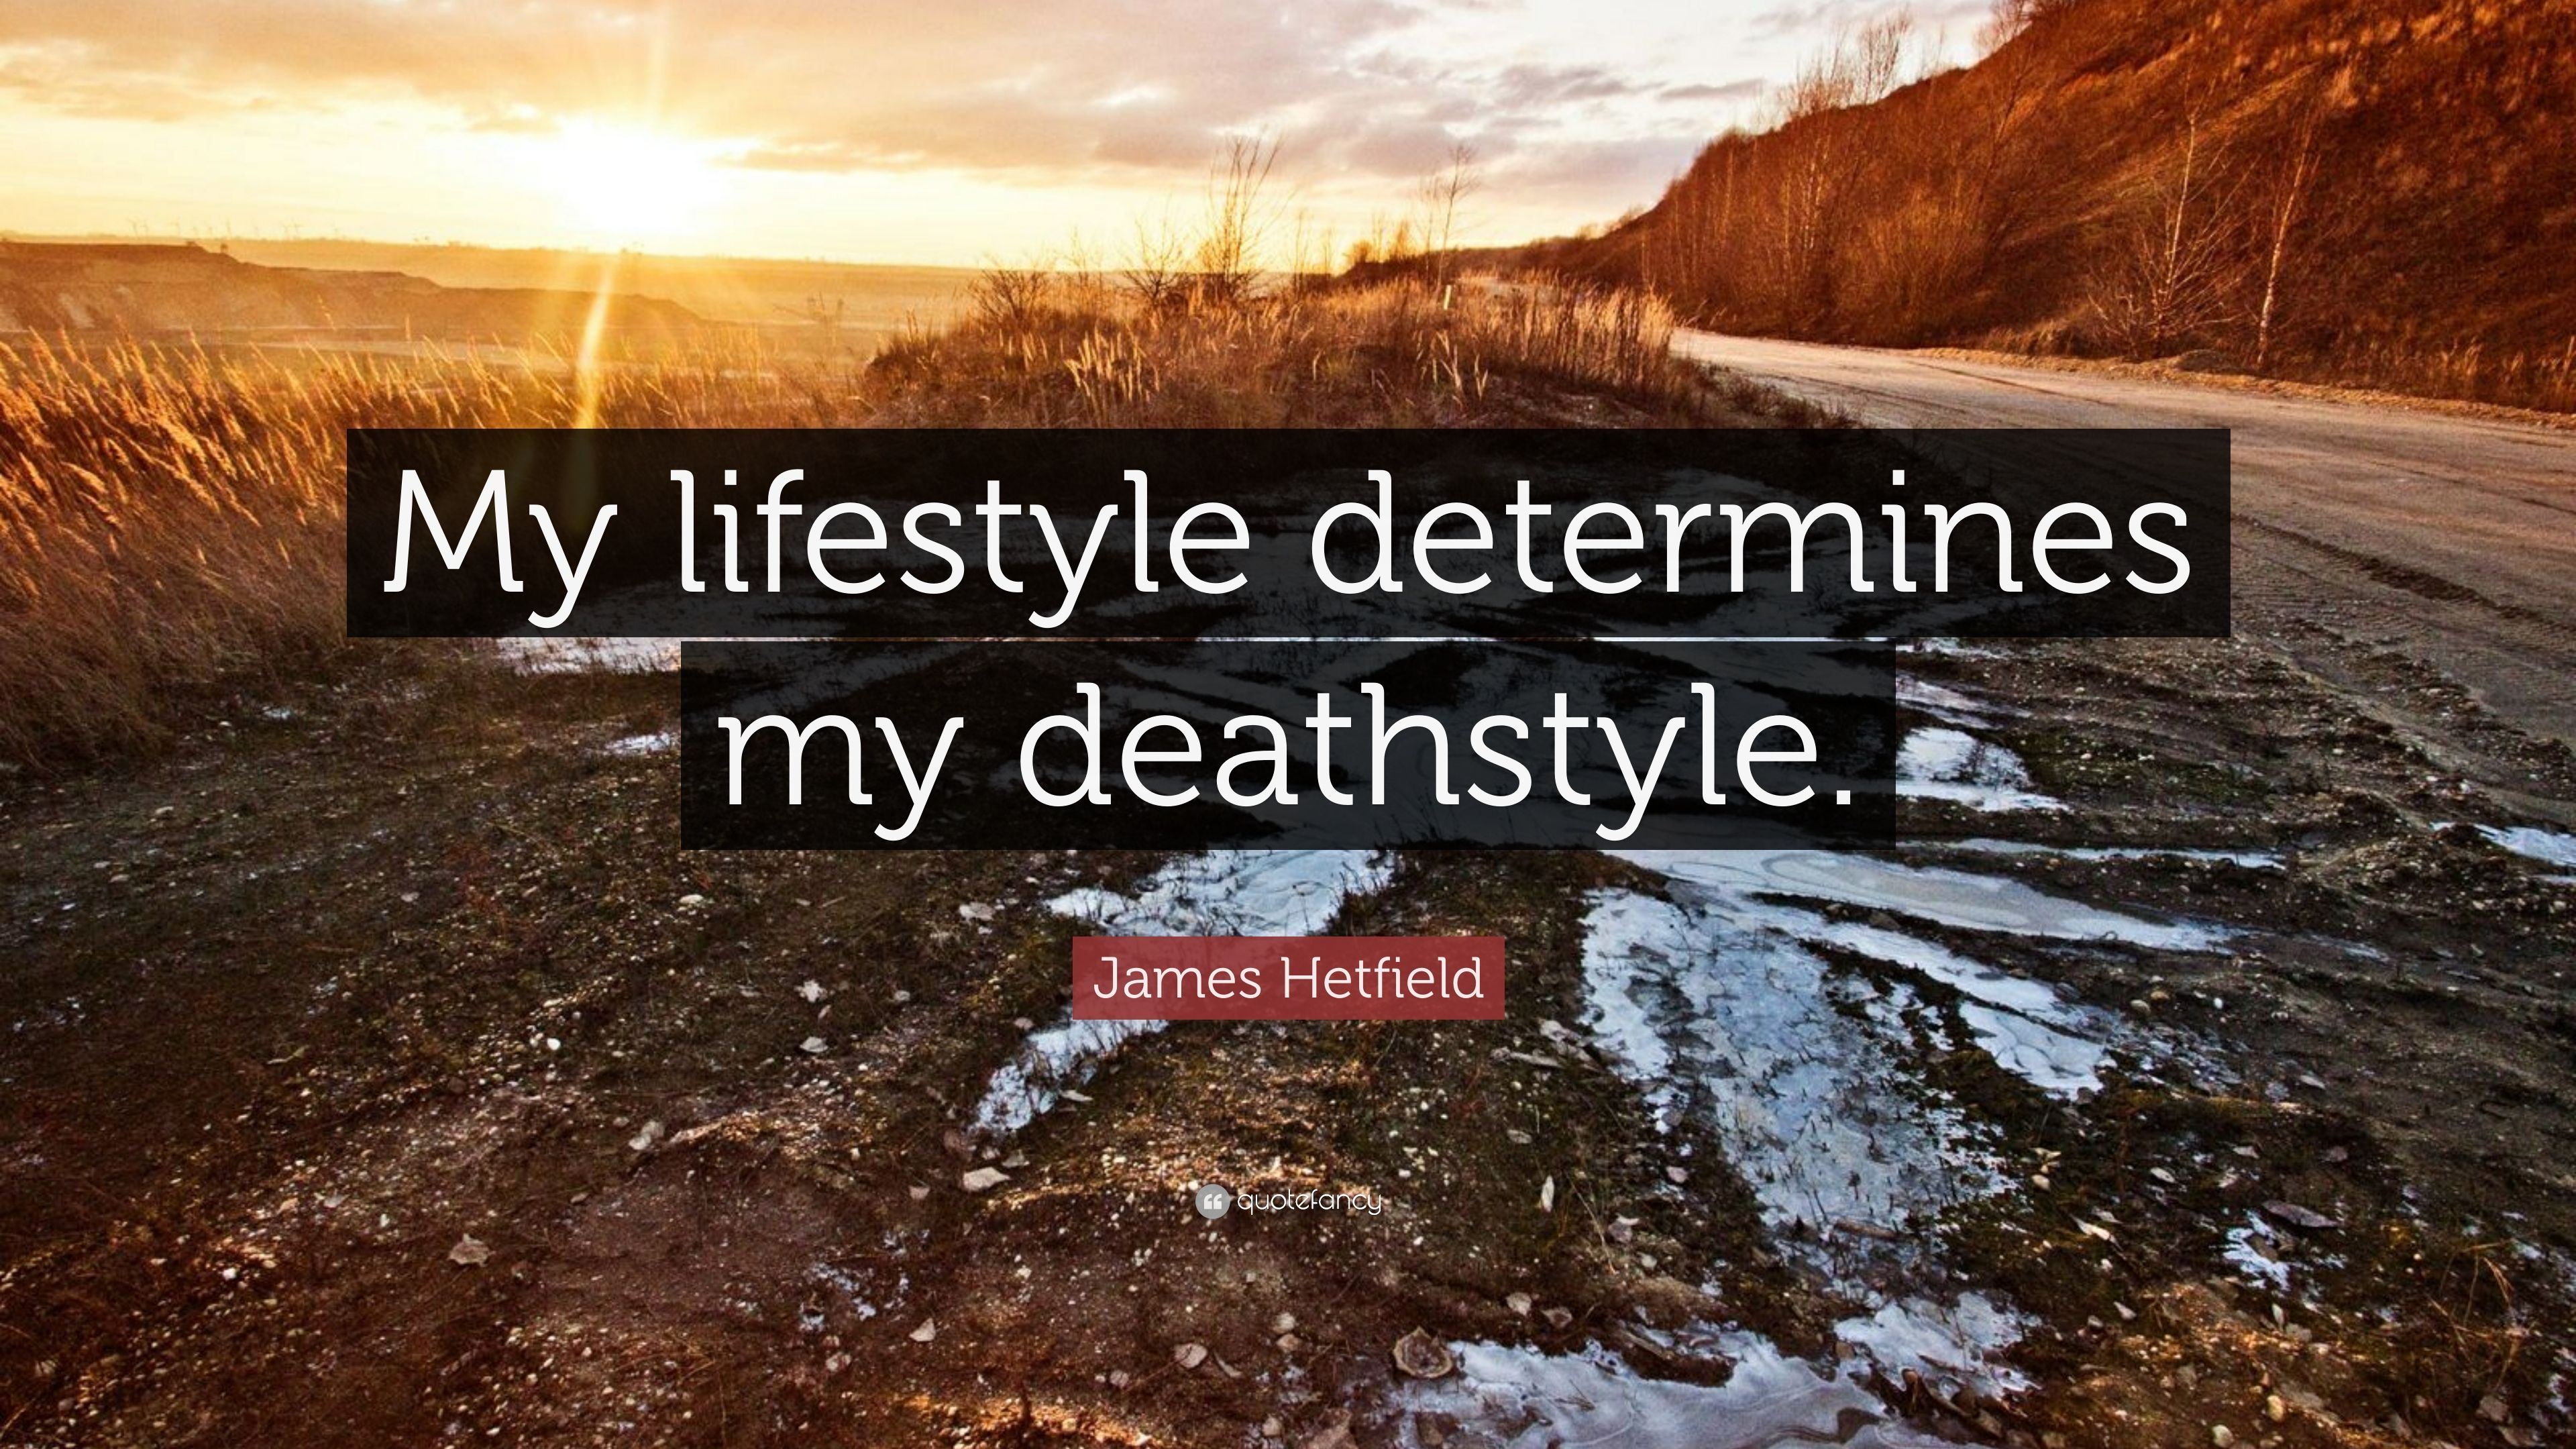 James Hetfield Quote: “My lifestyle determines my deathstyle.” 7